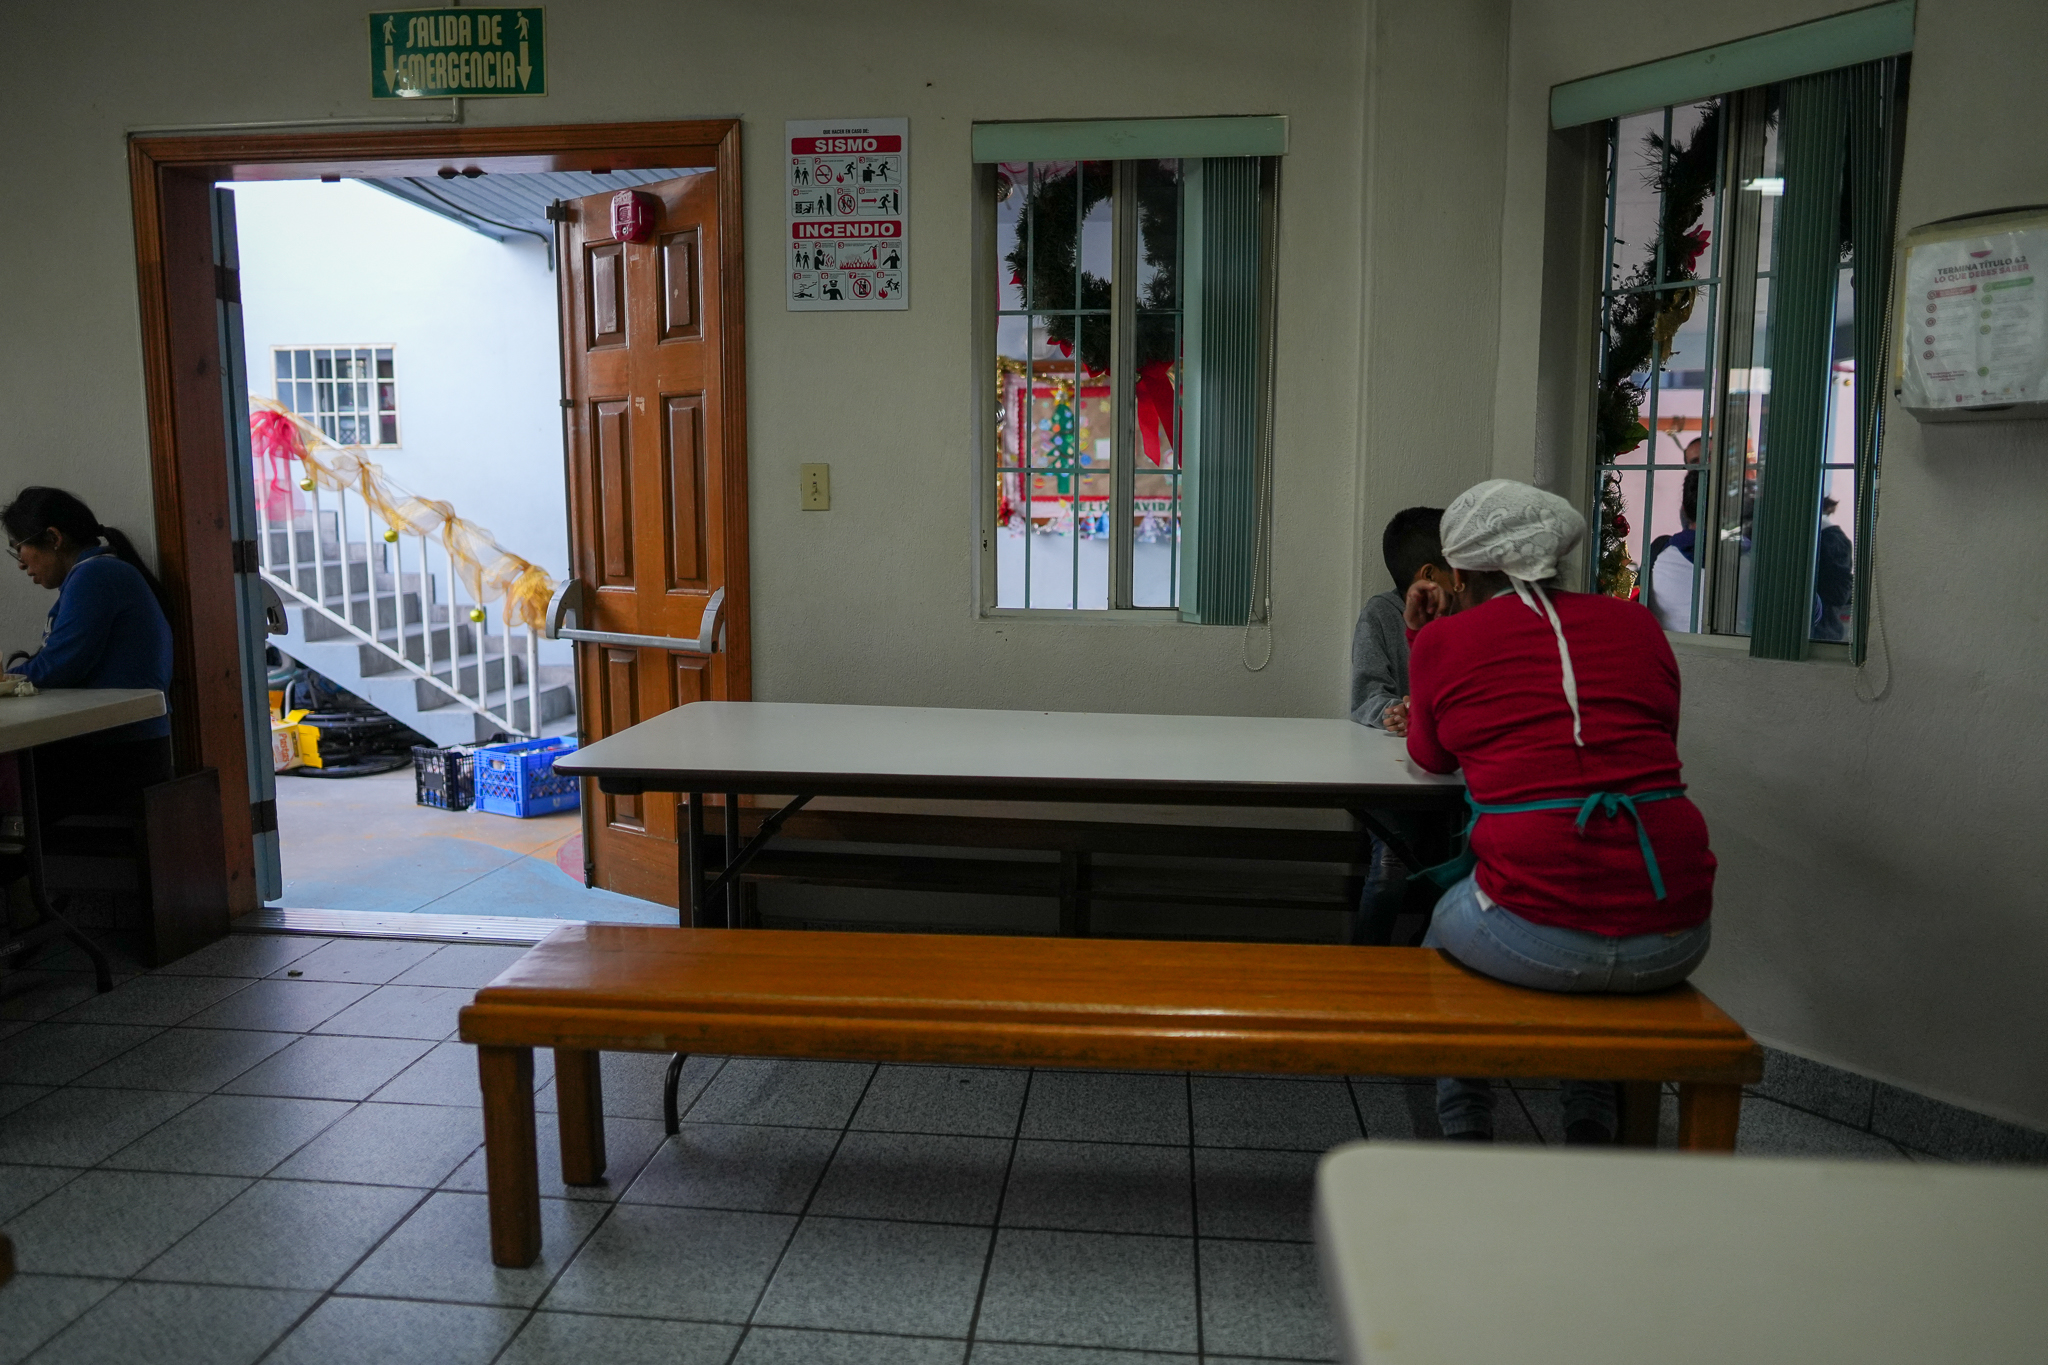 In the waiting rooms of the Instituto Madre Asunta, migrant women receive legal assistance, and they can also rest while their children participate in recreational or educational activities. (Jorge Nieto)